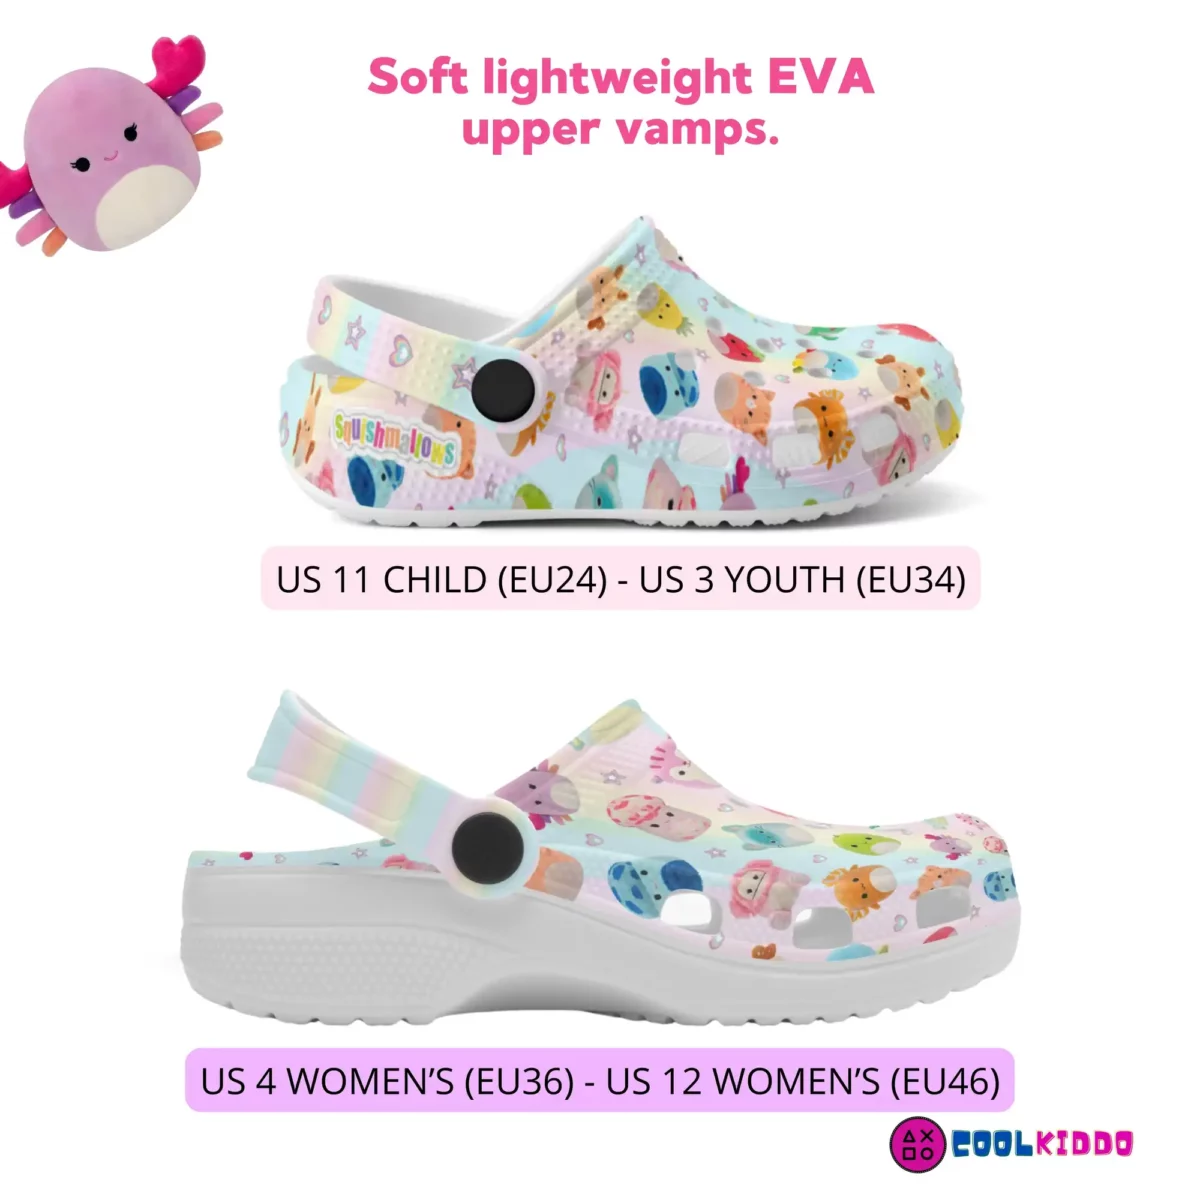 Personalized Squishmallows Clogs Shoes, Girls Clogs Shoes, Funny Crocs Clogs, Crocband Cool Kiddo 22